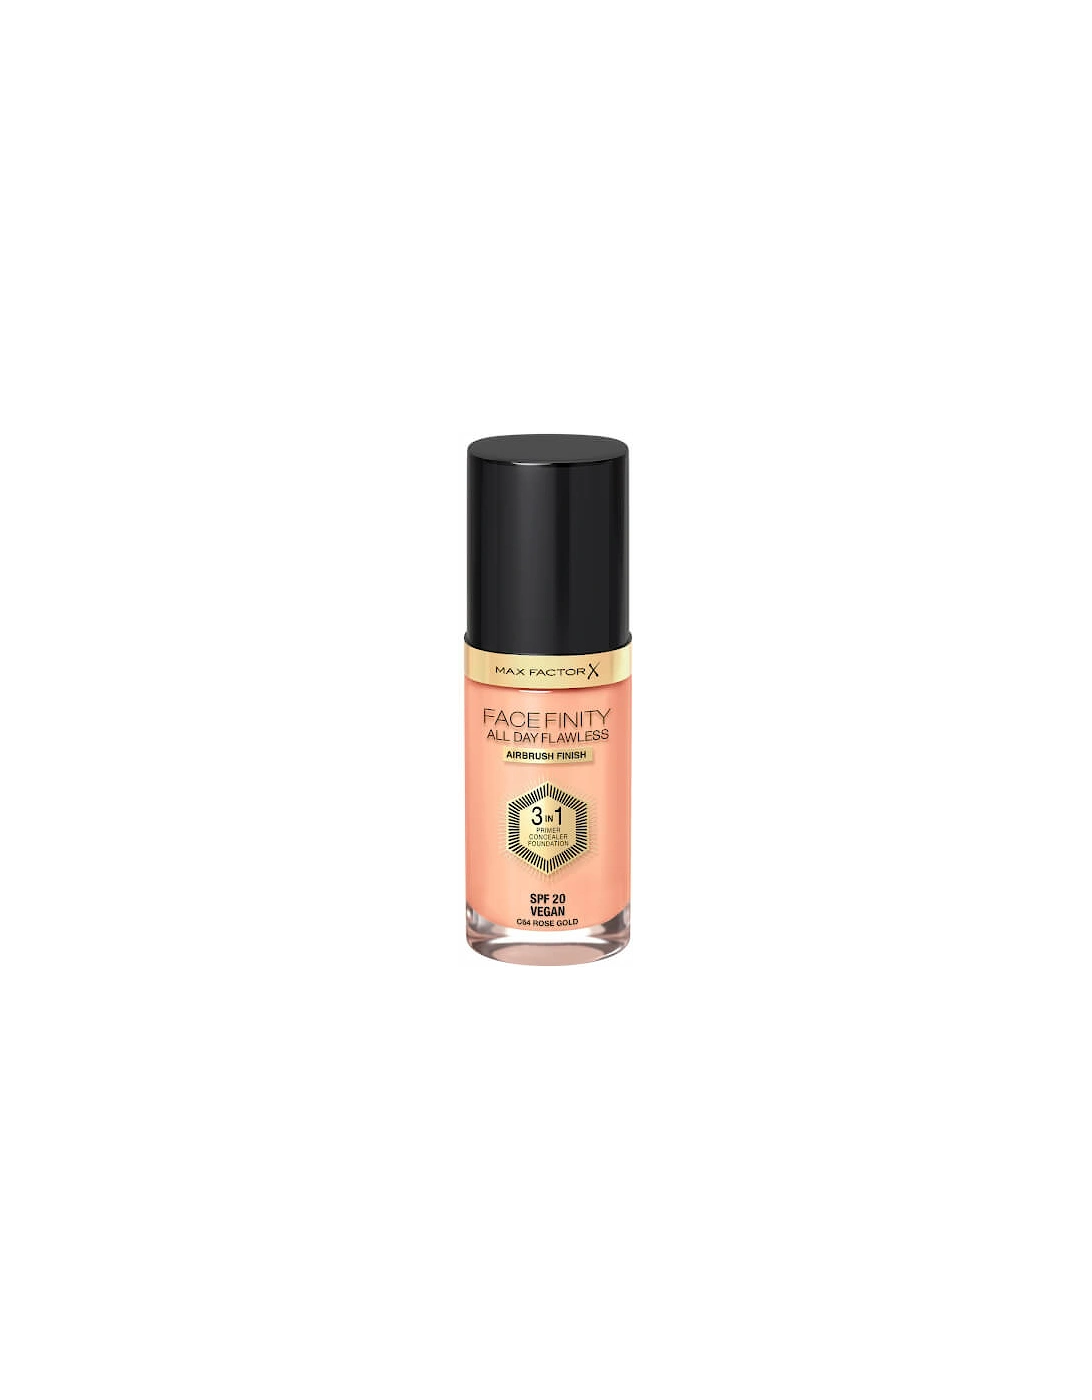 Facefinity All Day Flawless Foundation - Tawny